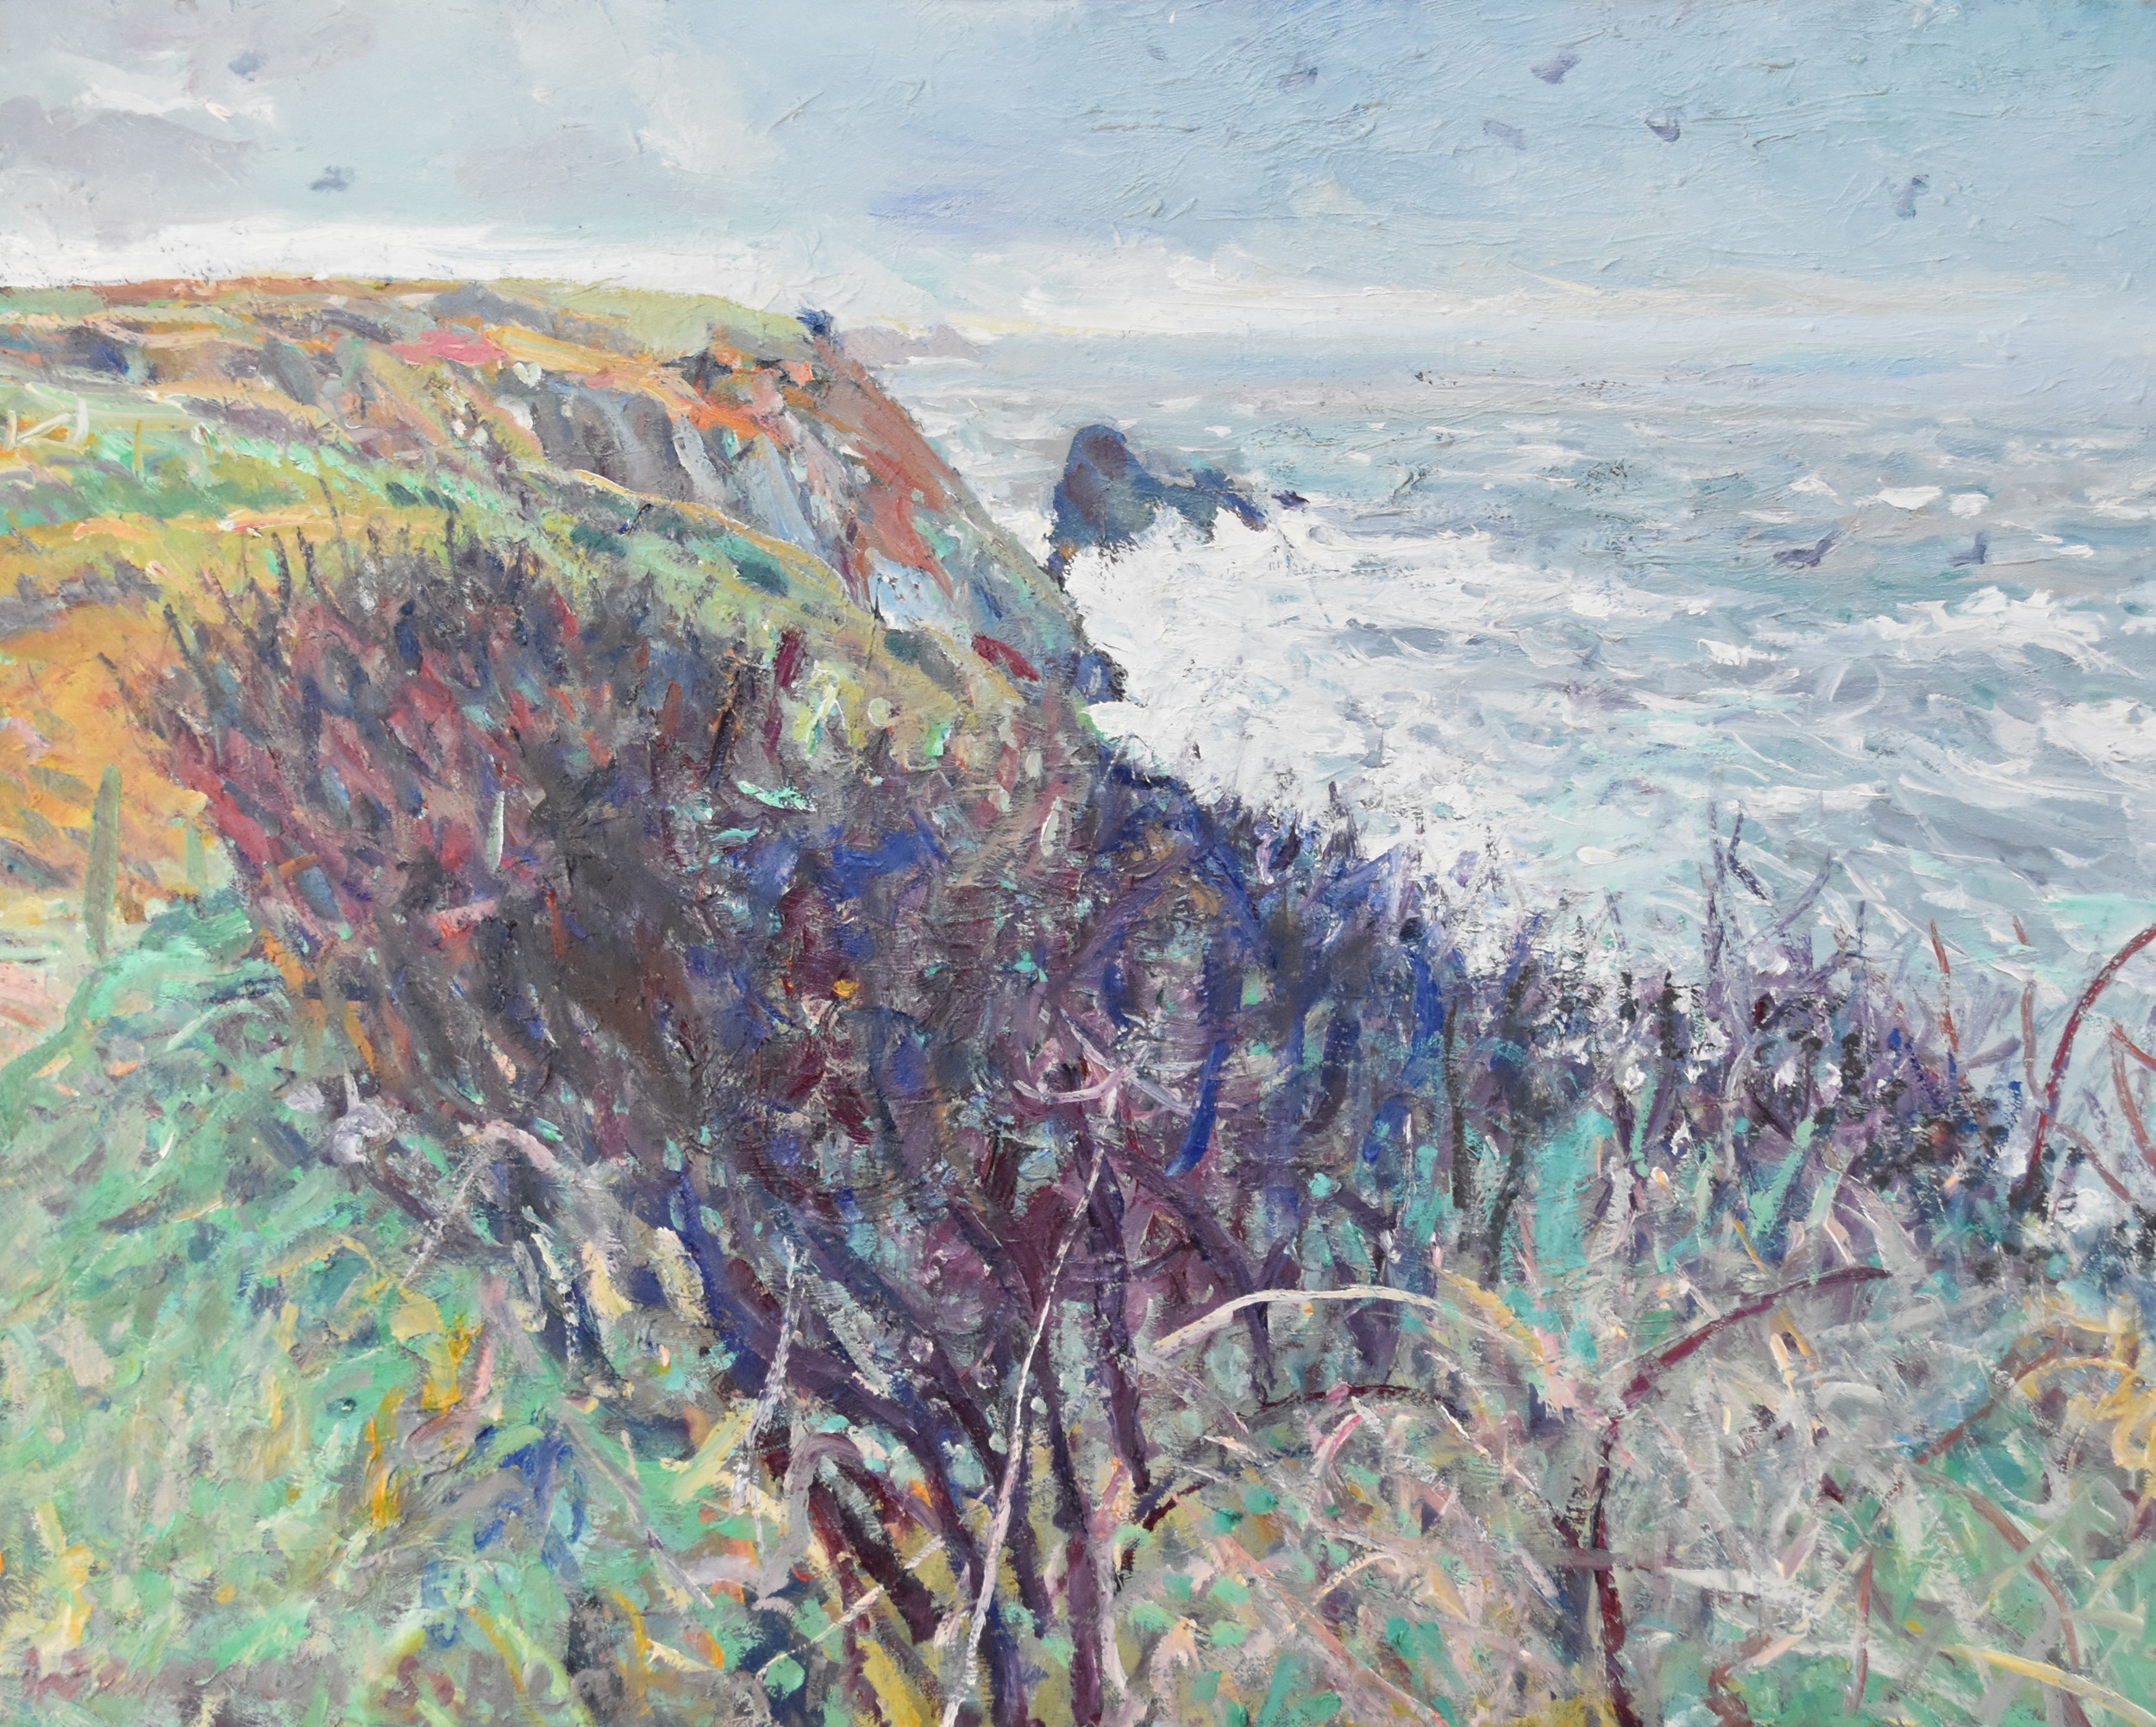 Warren S Heaton (20th-21st Century) Coasting new Pwll Llong, blackthorn and stormy seas, 2016, oil